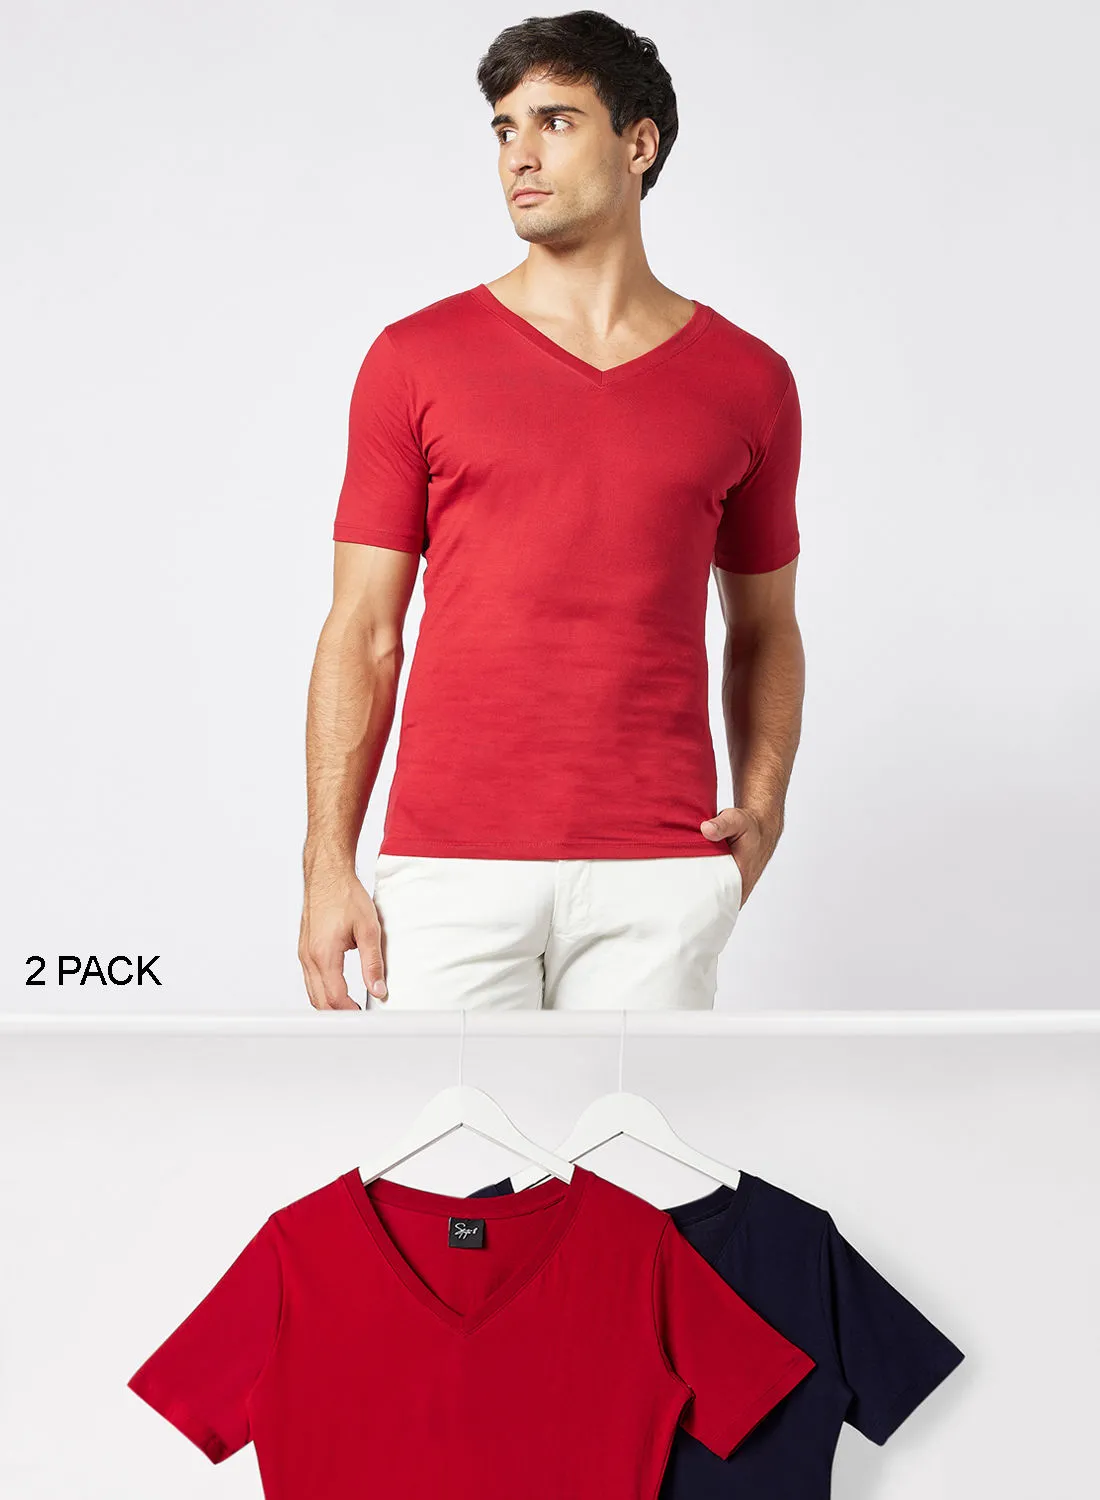 STATE 8 Essential V Neck T-Shirt (Pack of 2) Red/Navy